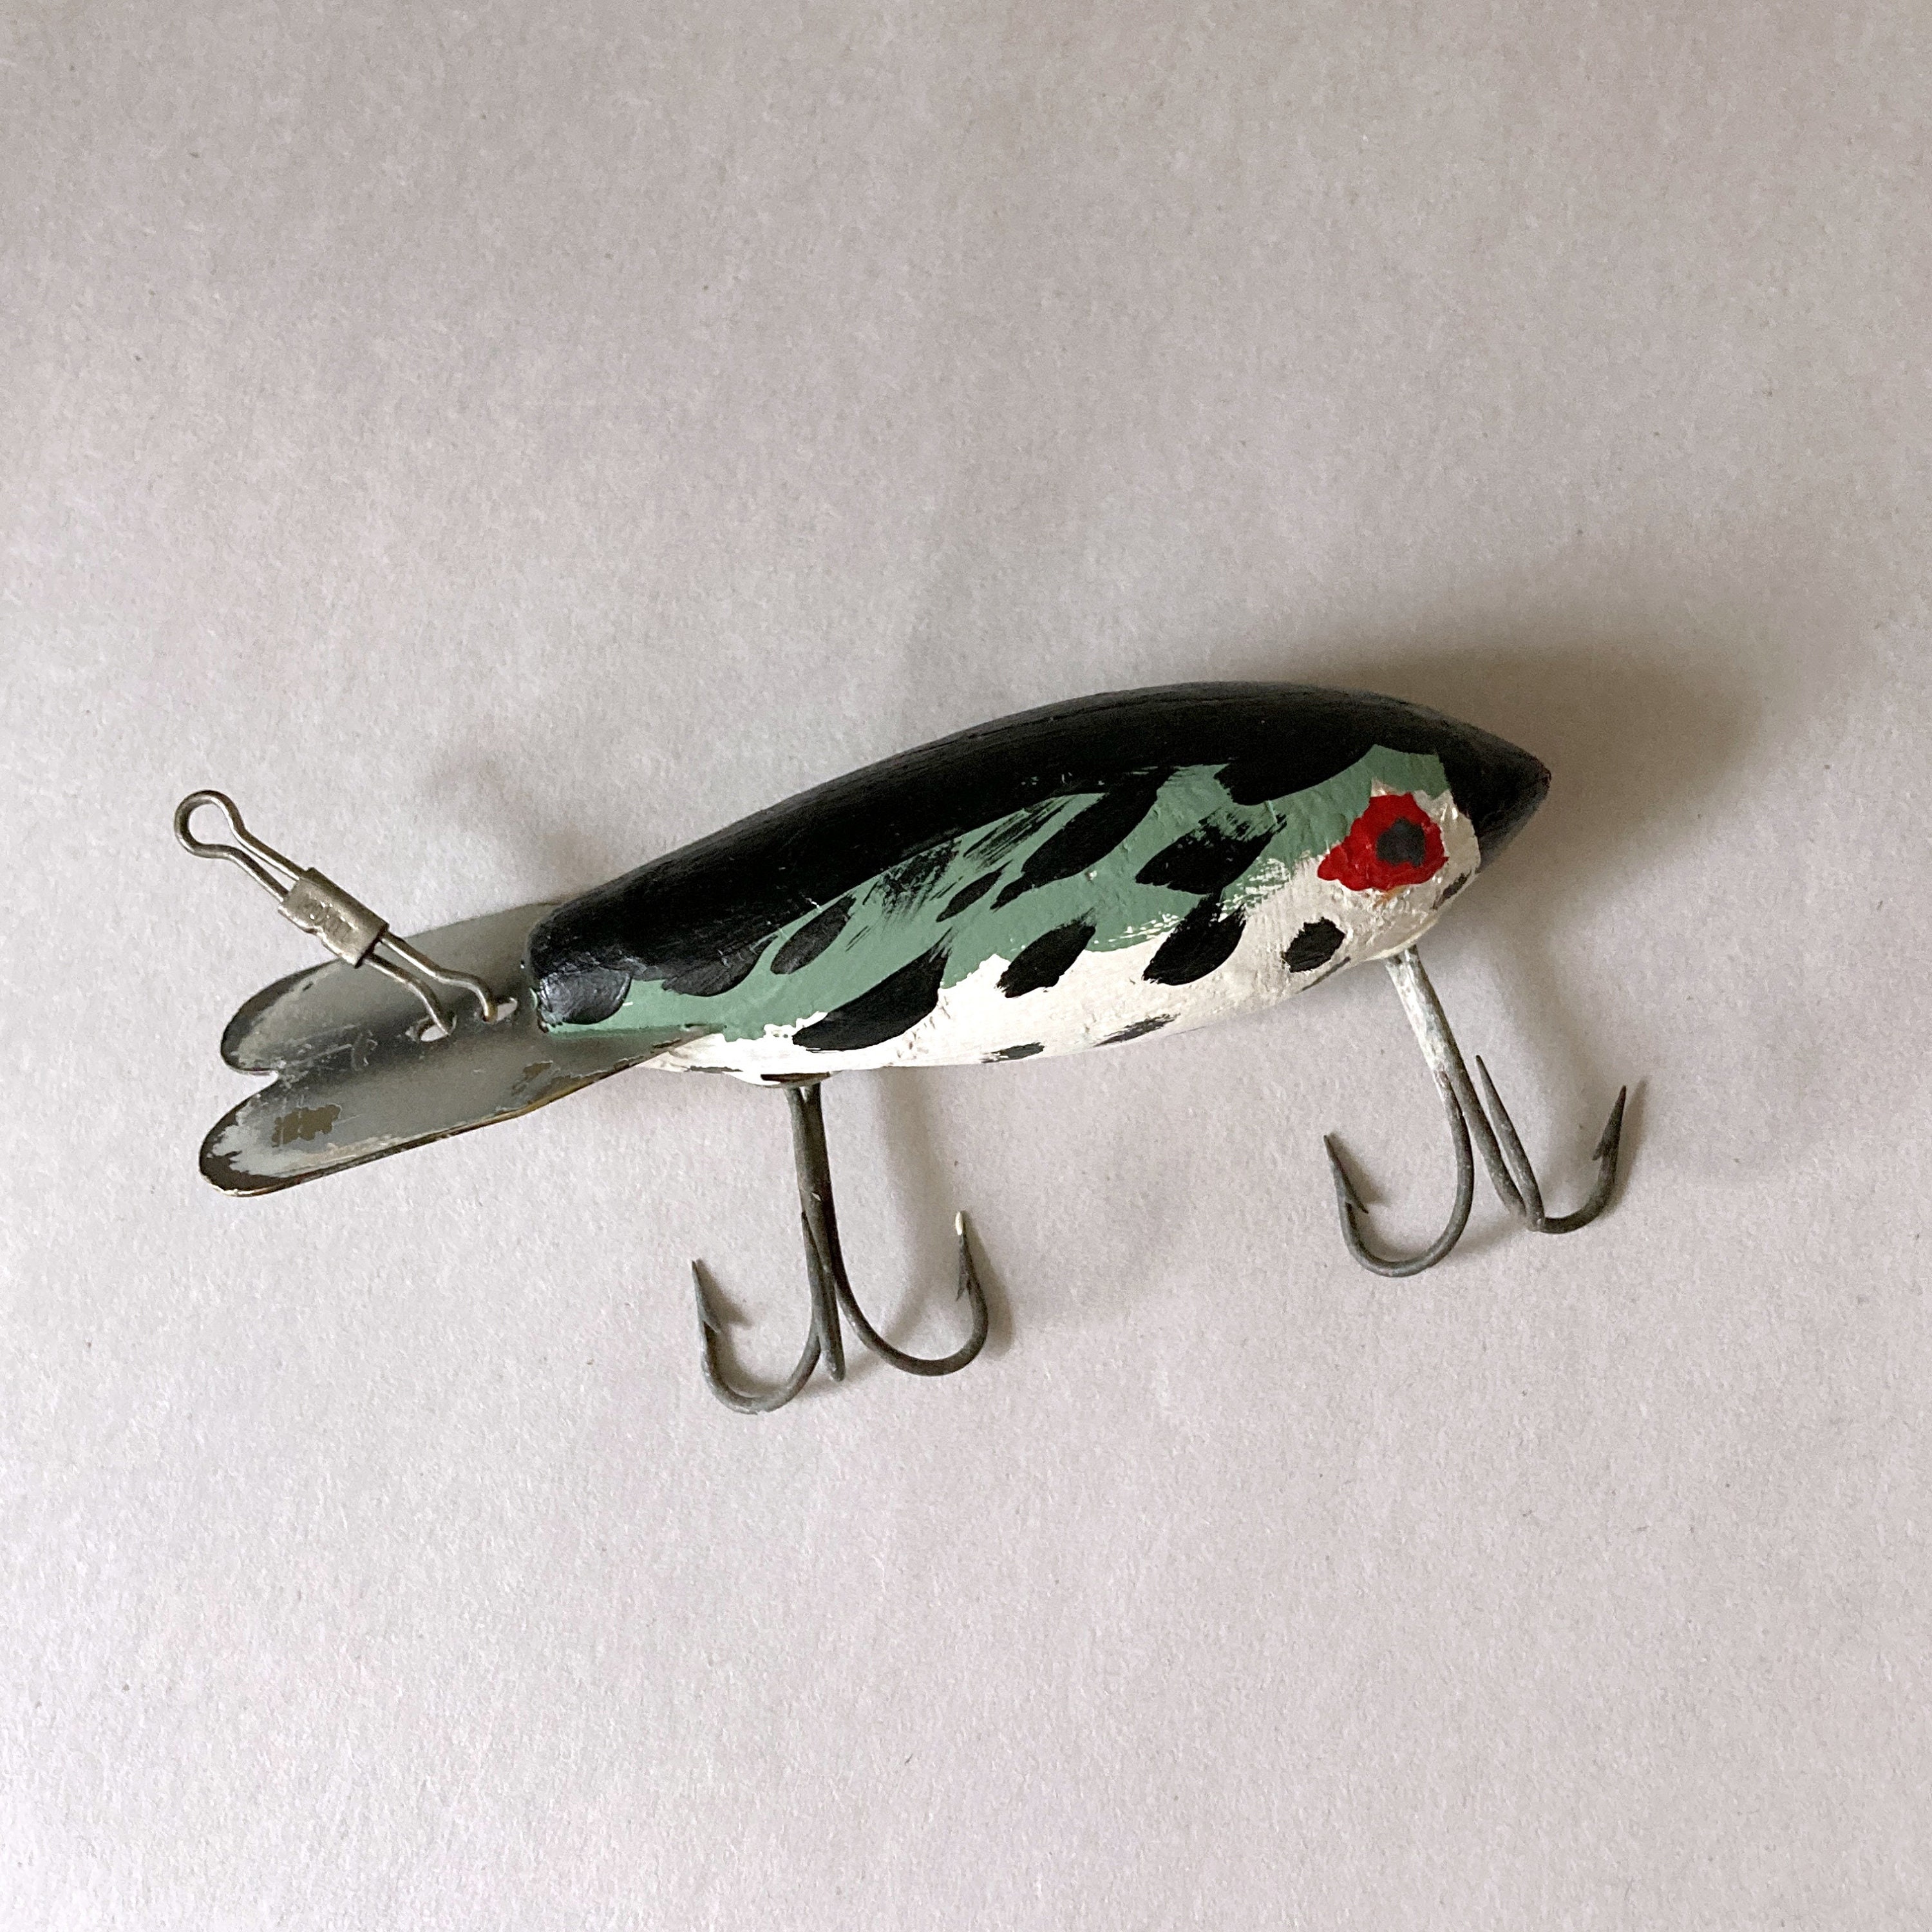 Buy Vintage Heddon Preyfish Series 560 Natural american Shad Fishing Lure  Plus One Unmarked Refurbished Fishing Lure Beach House Decor Online in  India 